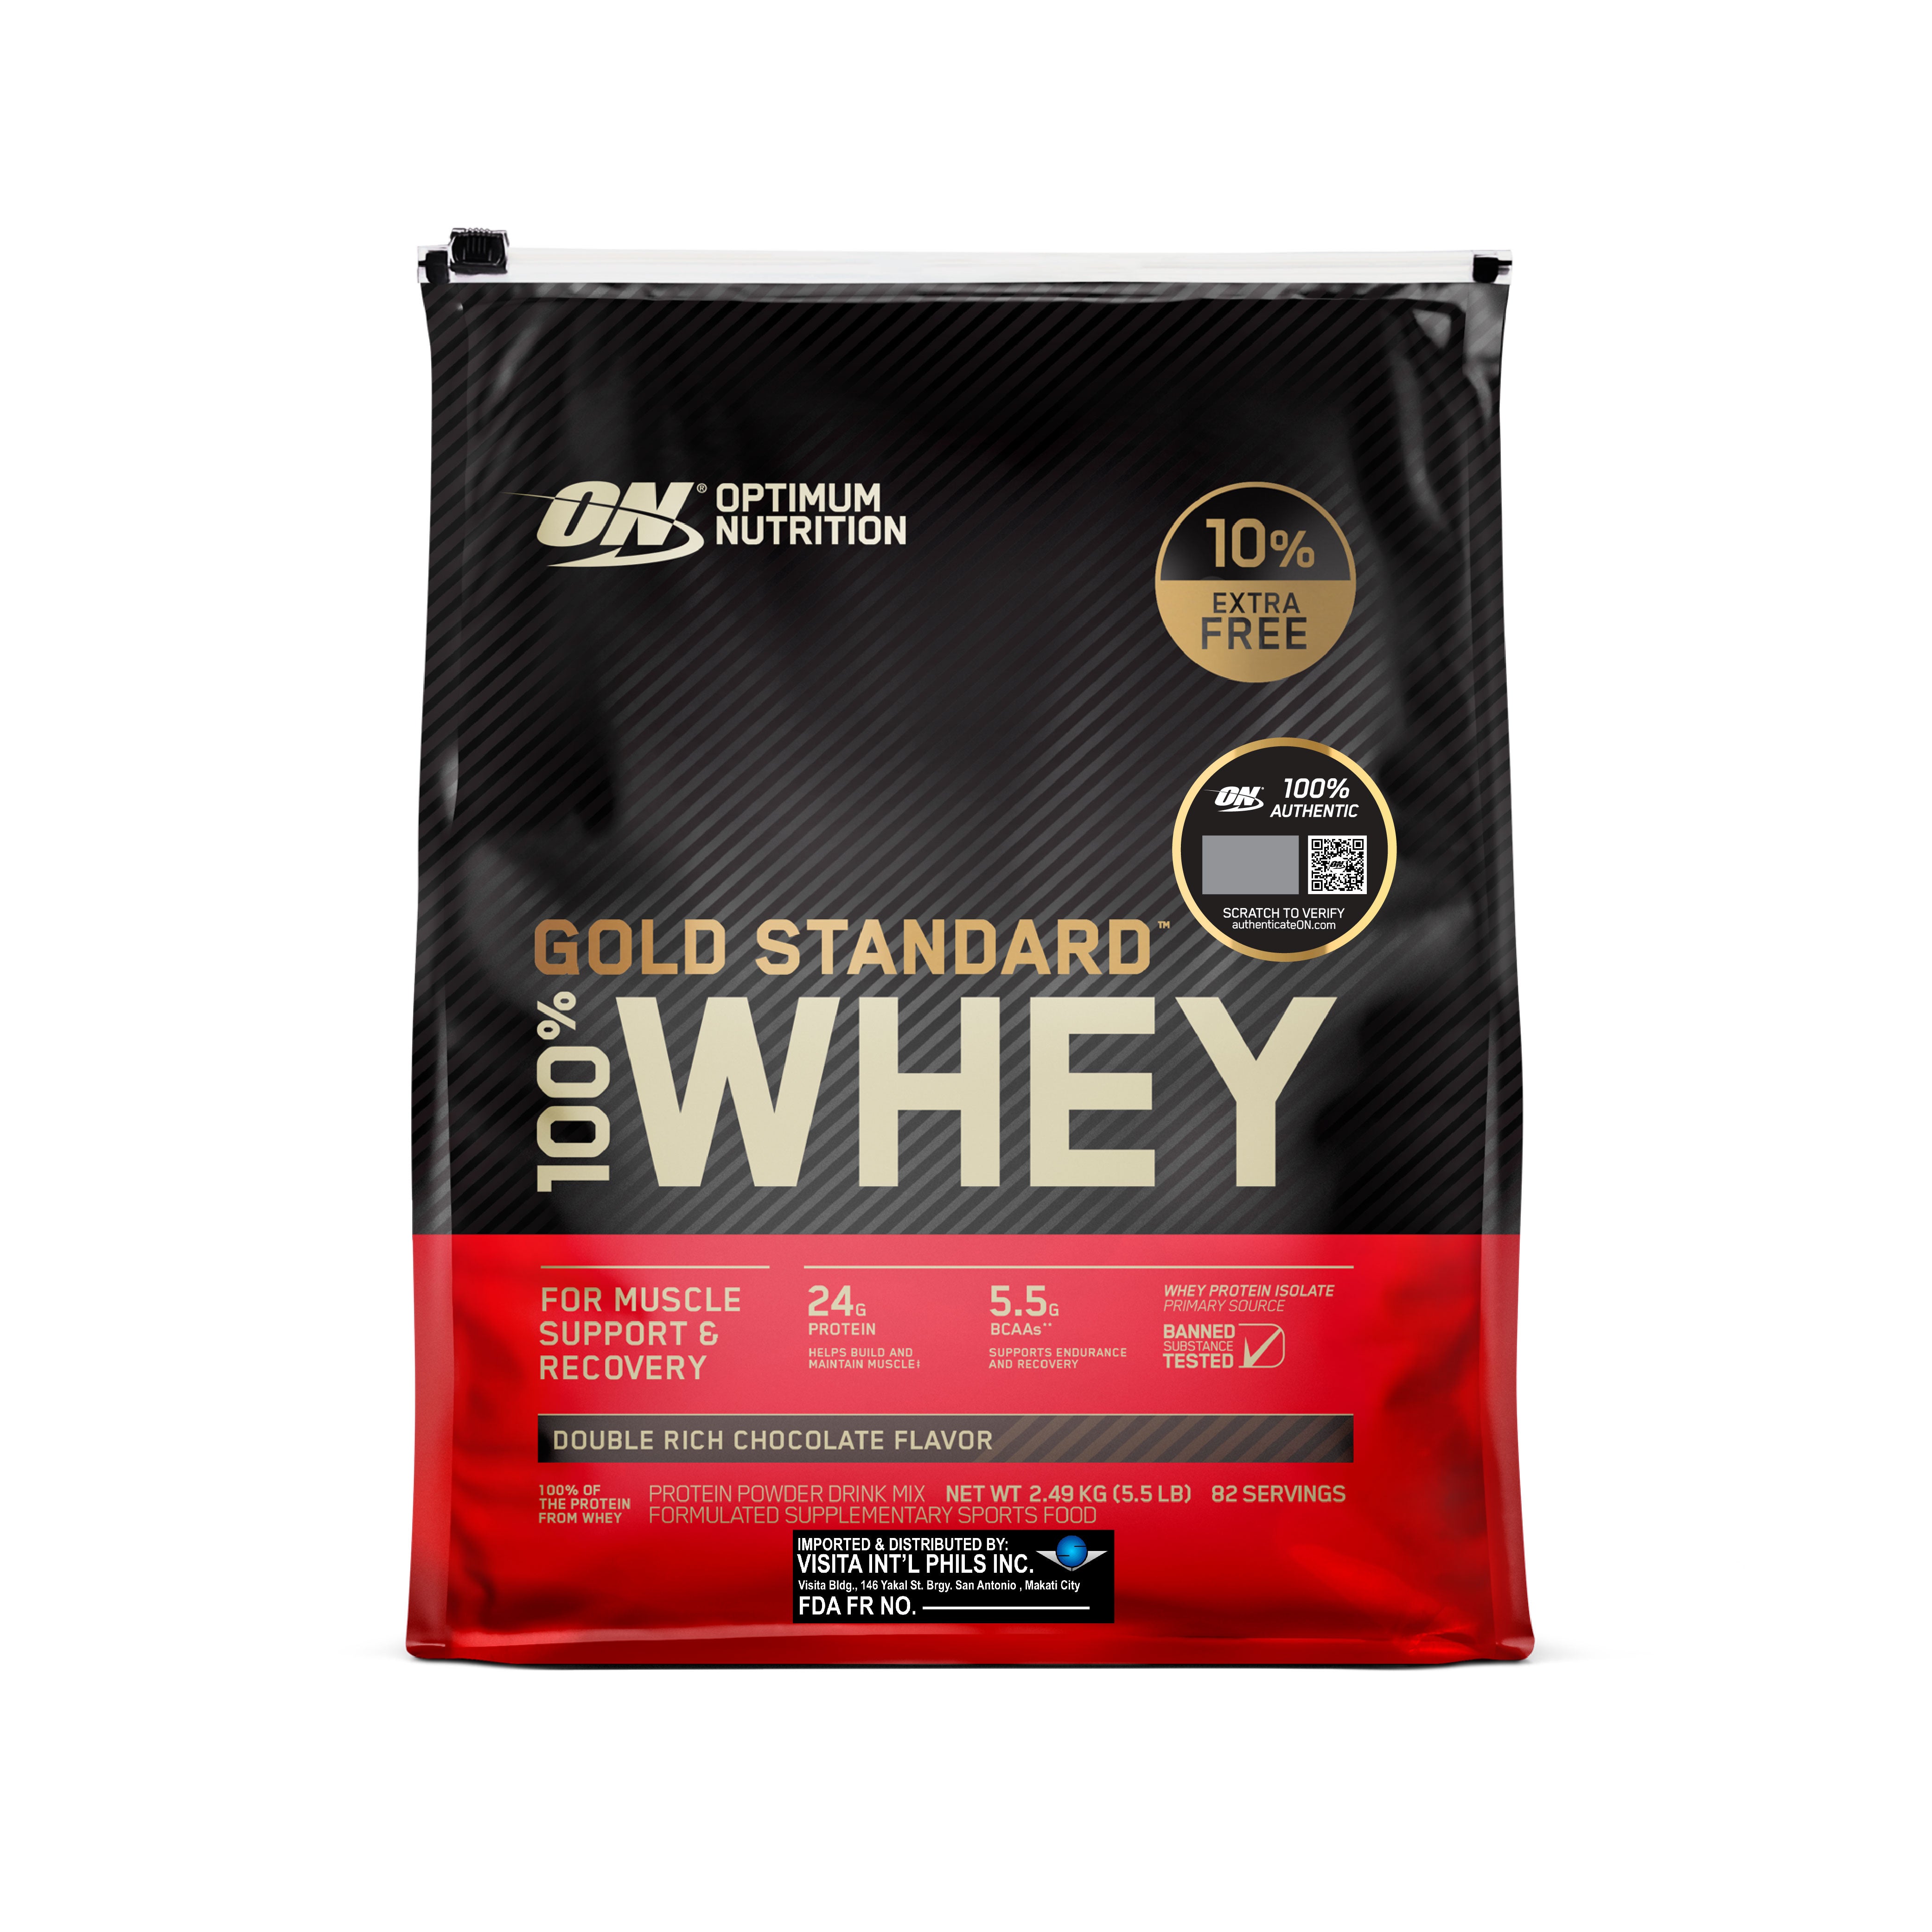 ON Gold Standard Whey 5.5lbs